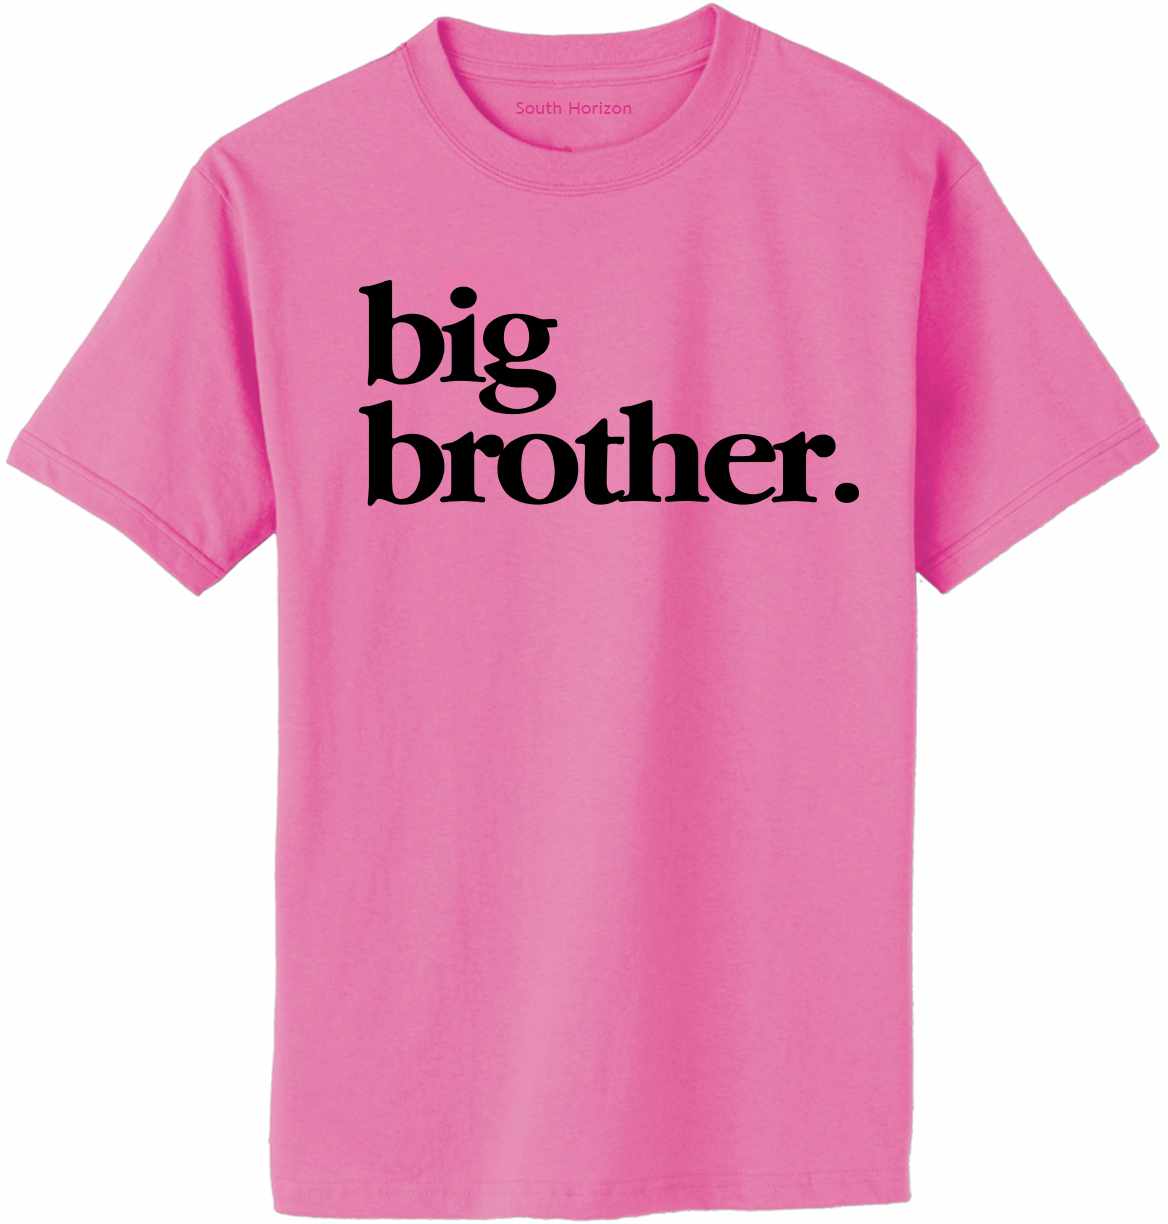 Big Brother on Adult T-Shirt